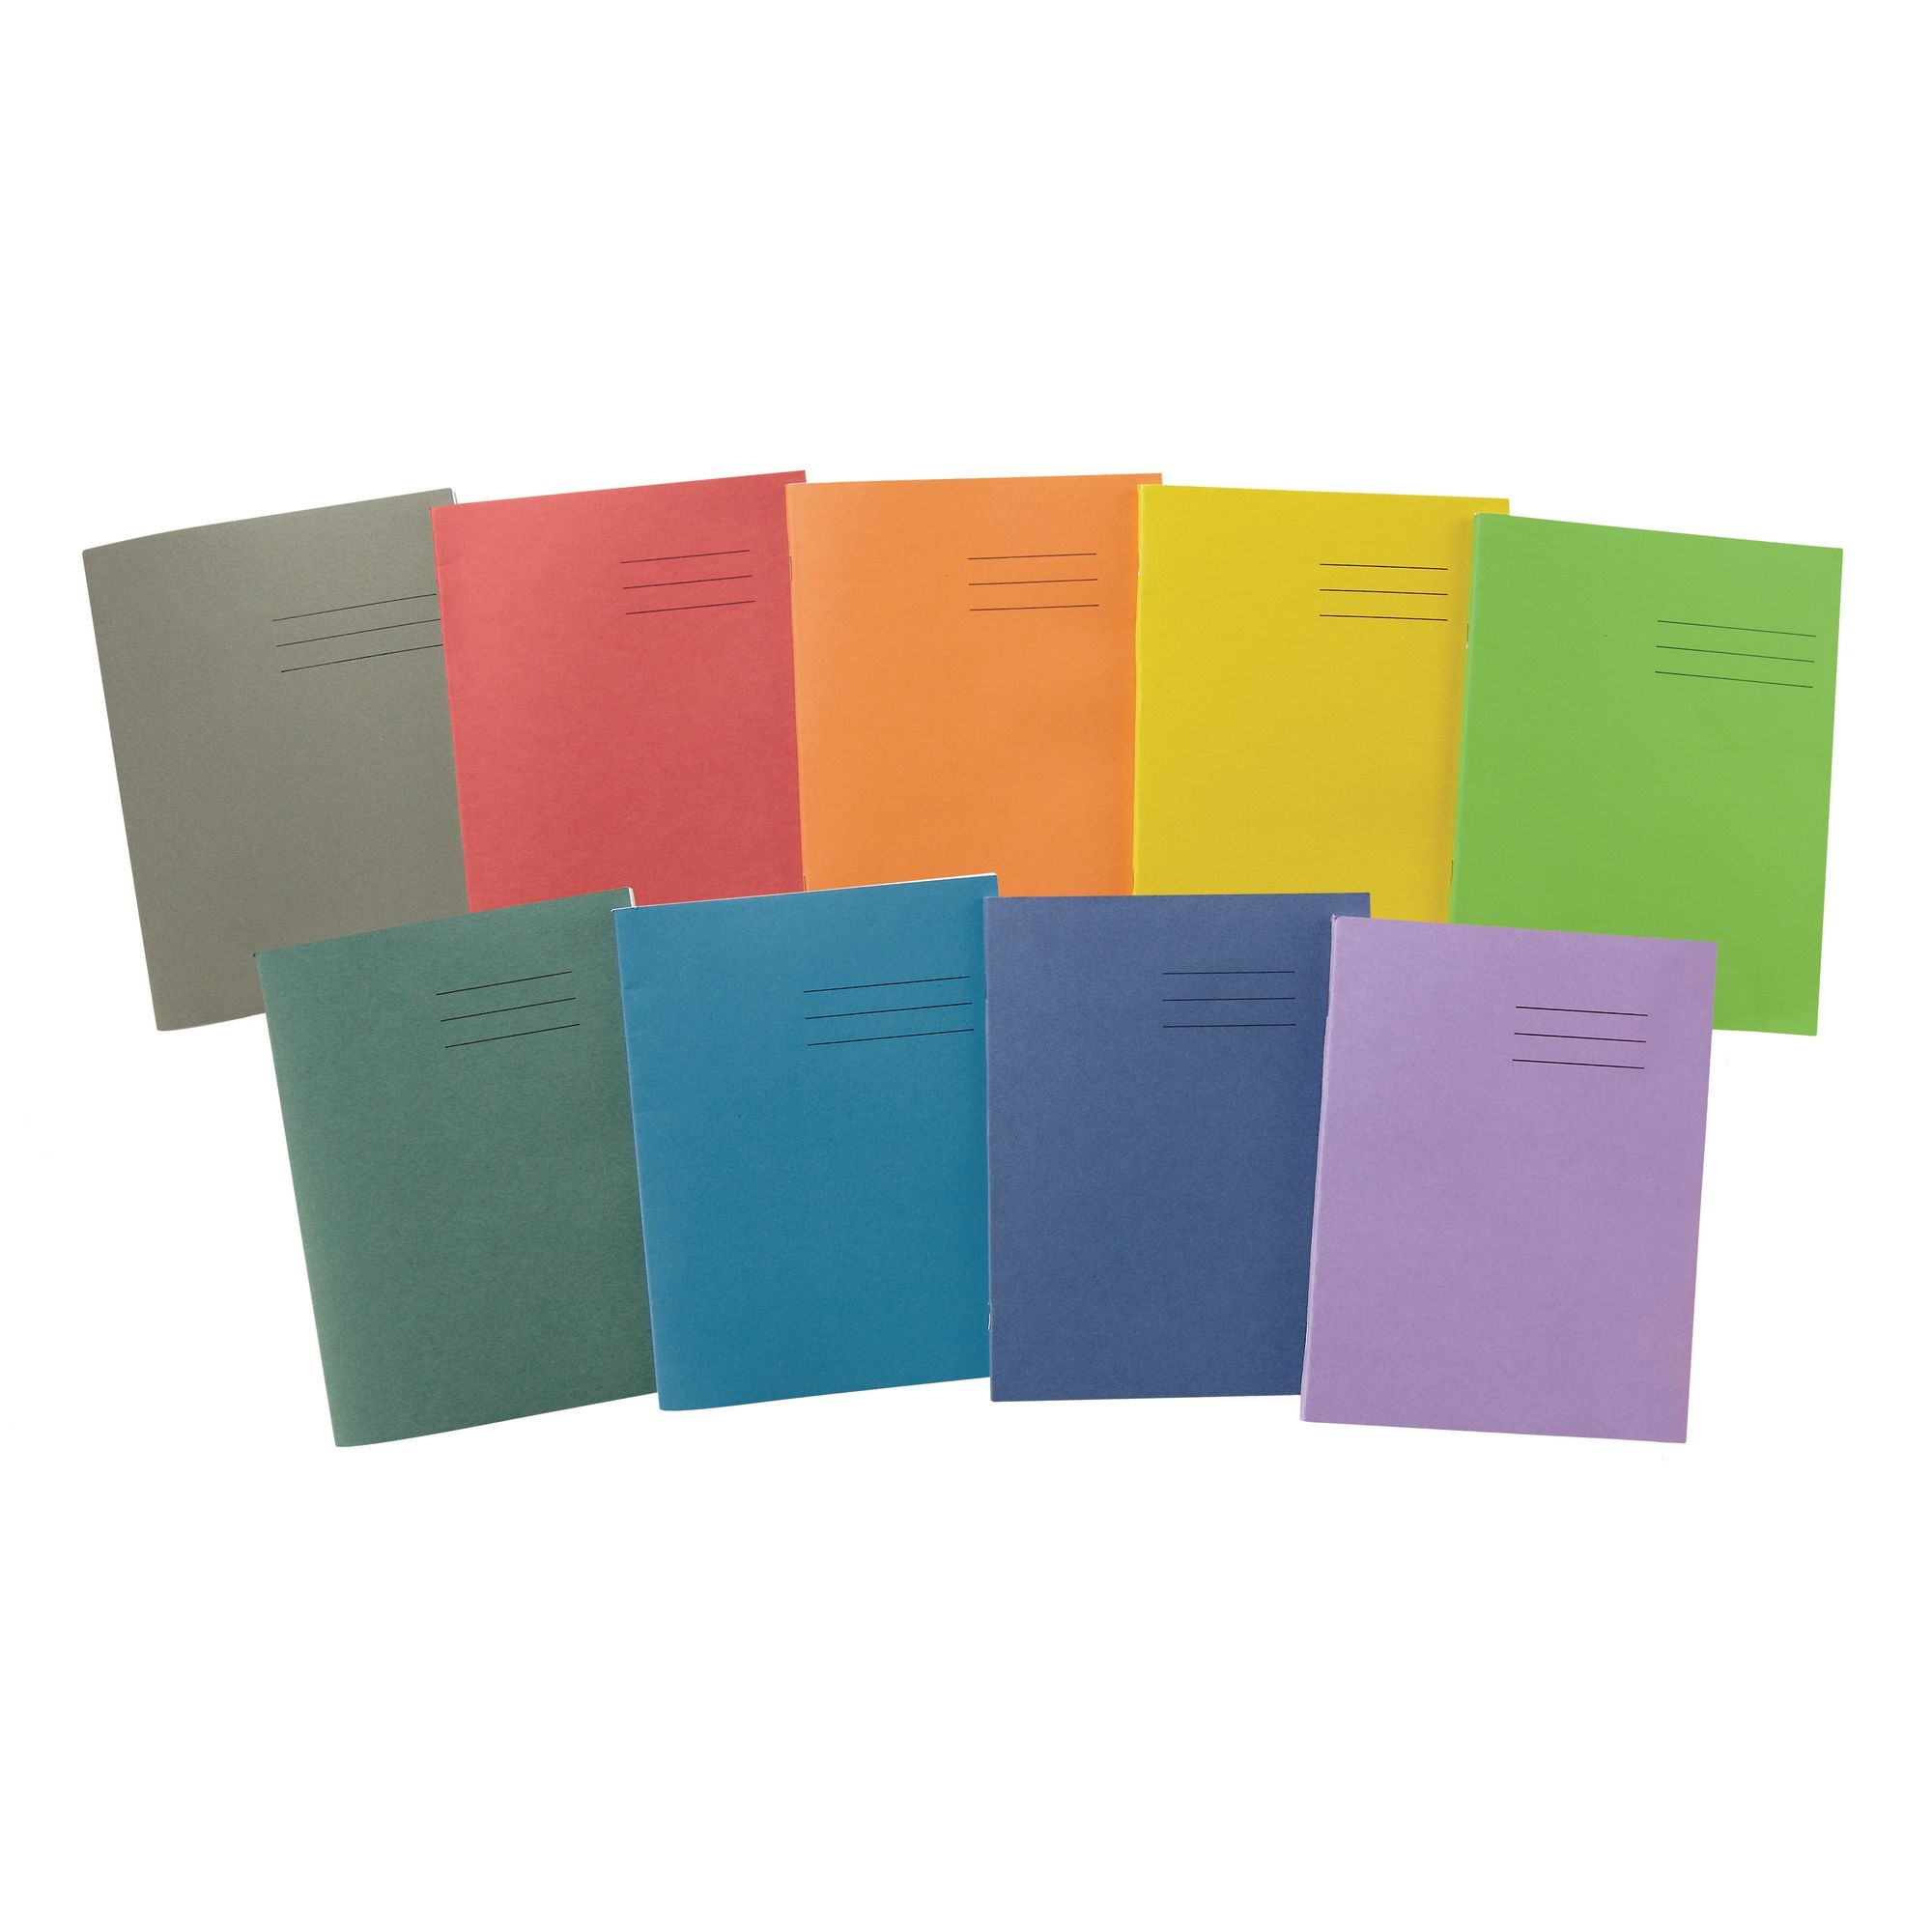 Dark Green 9x7" Exercise Book 80-Page, Plain - Pack of 100